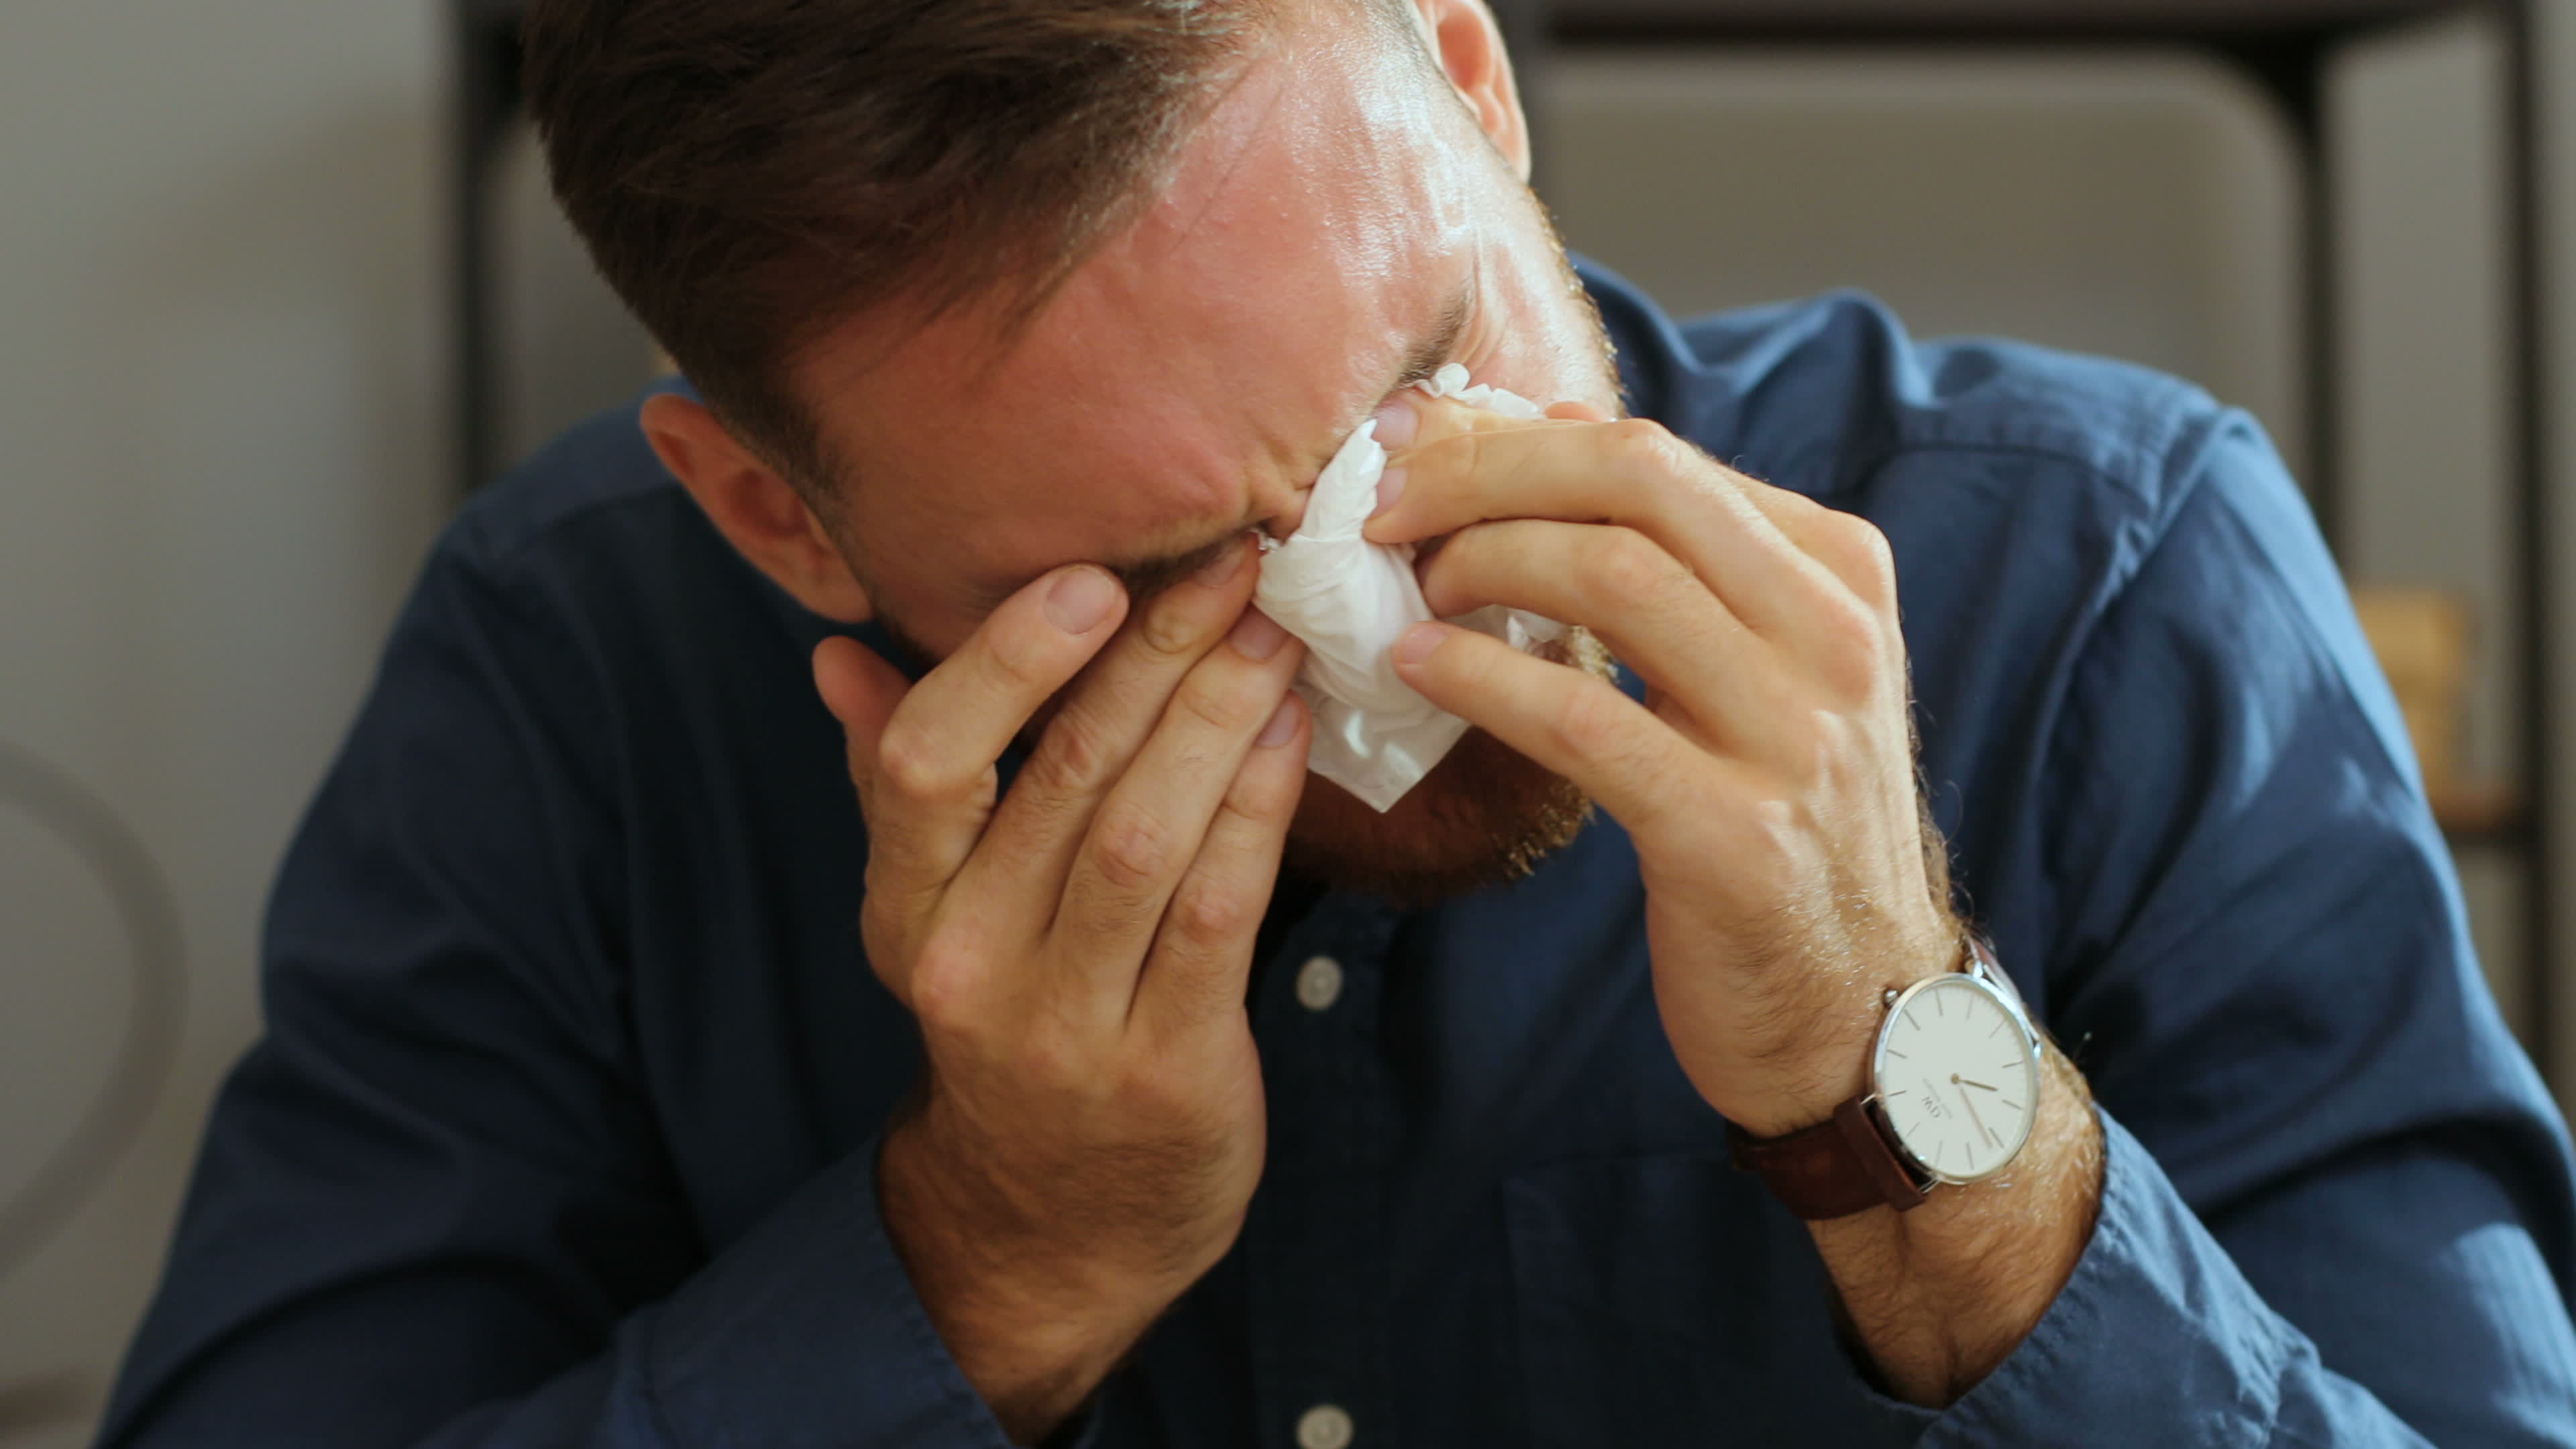 A man wiping his tears with a tissue paper | Source: Shutterstock